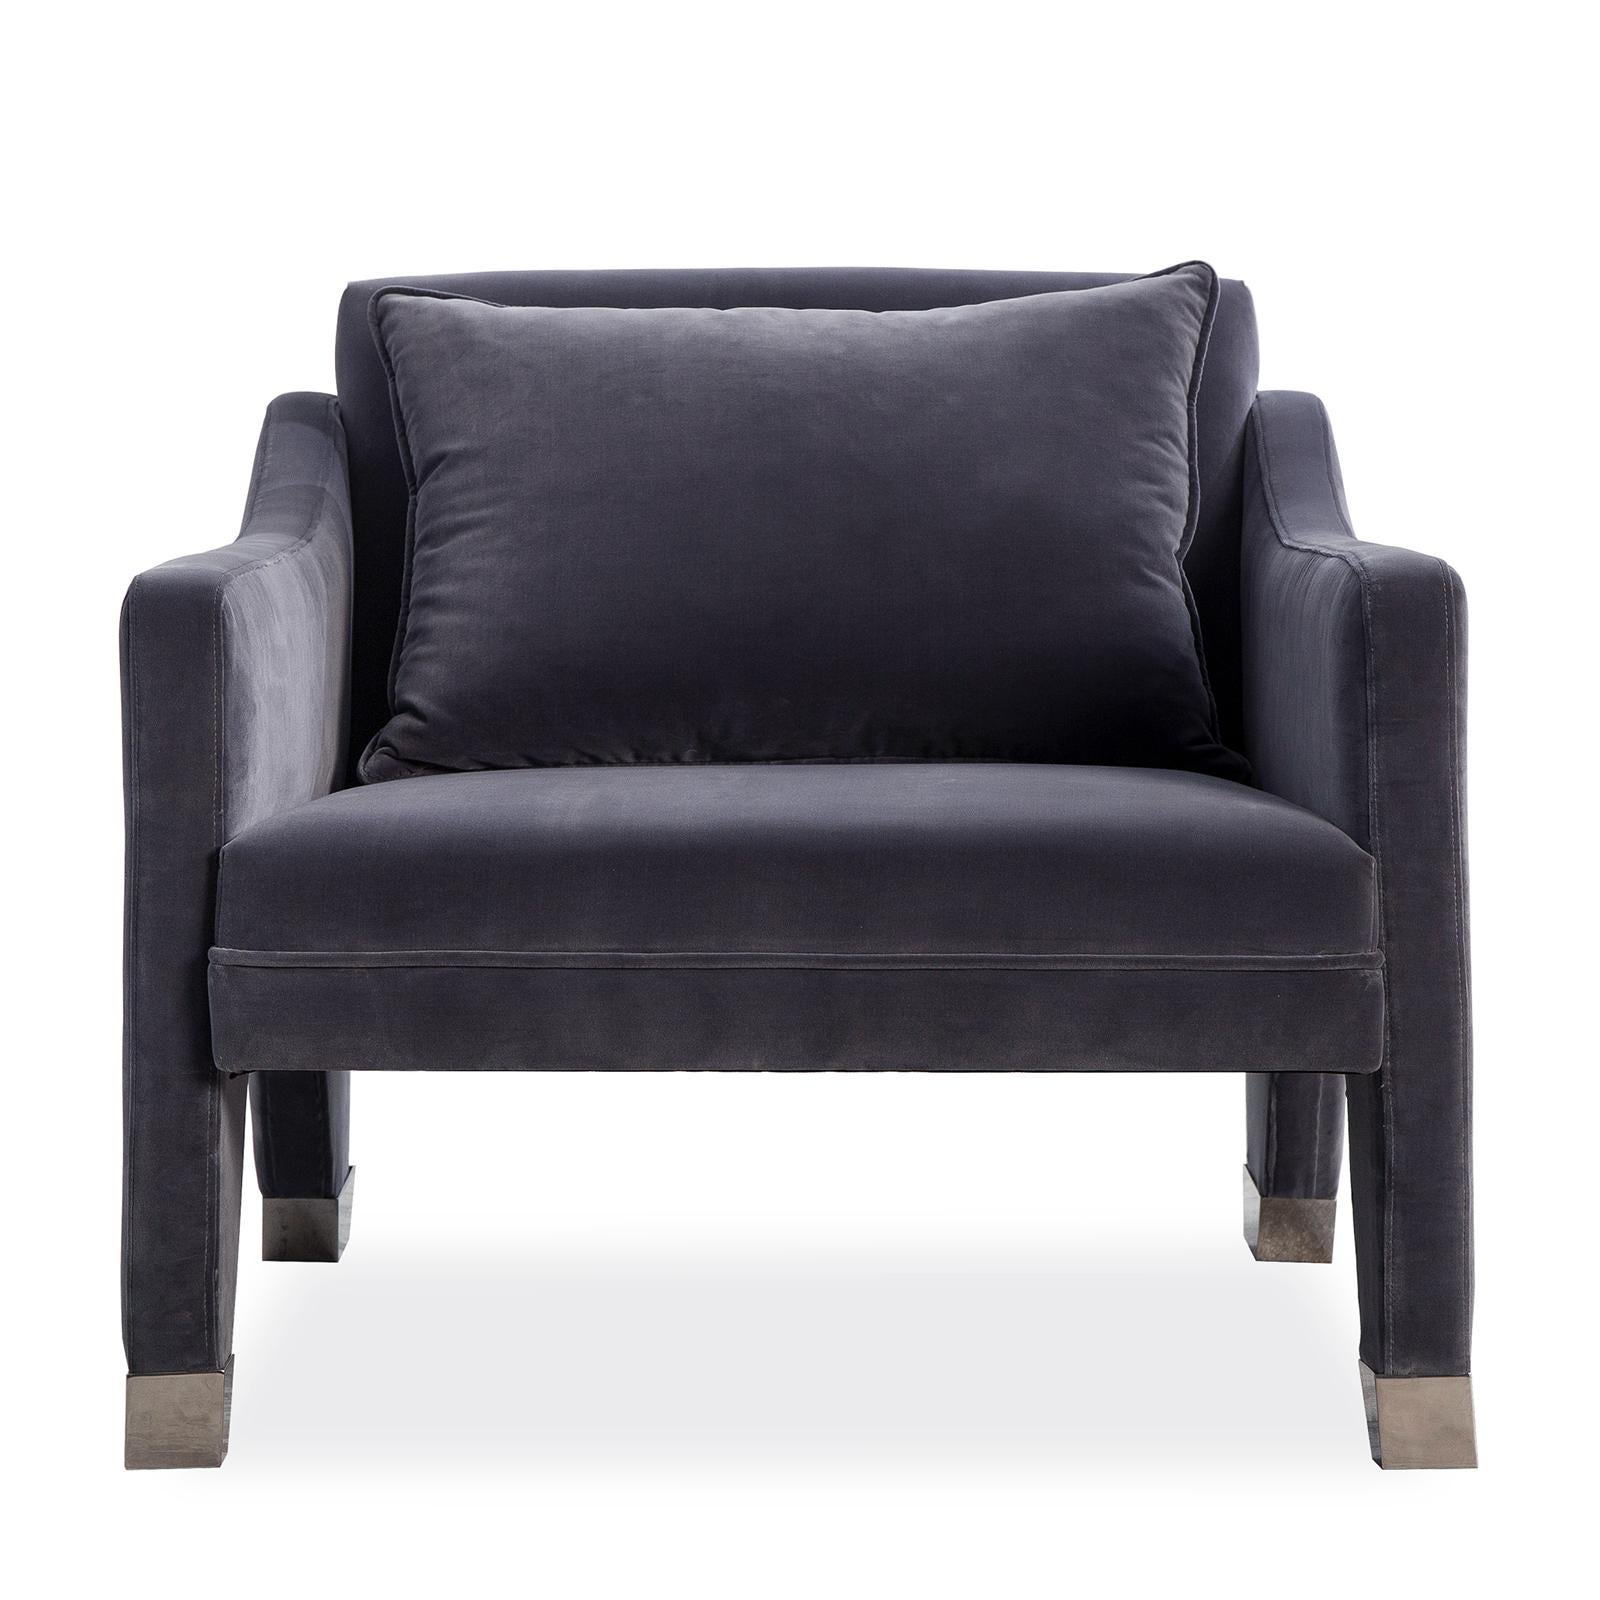 Armchair barry with structure in solid poplar wood,
upholstered and covered with faded blue velvet 
fabric. With stainless steel feet.